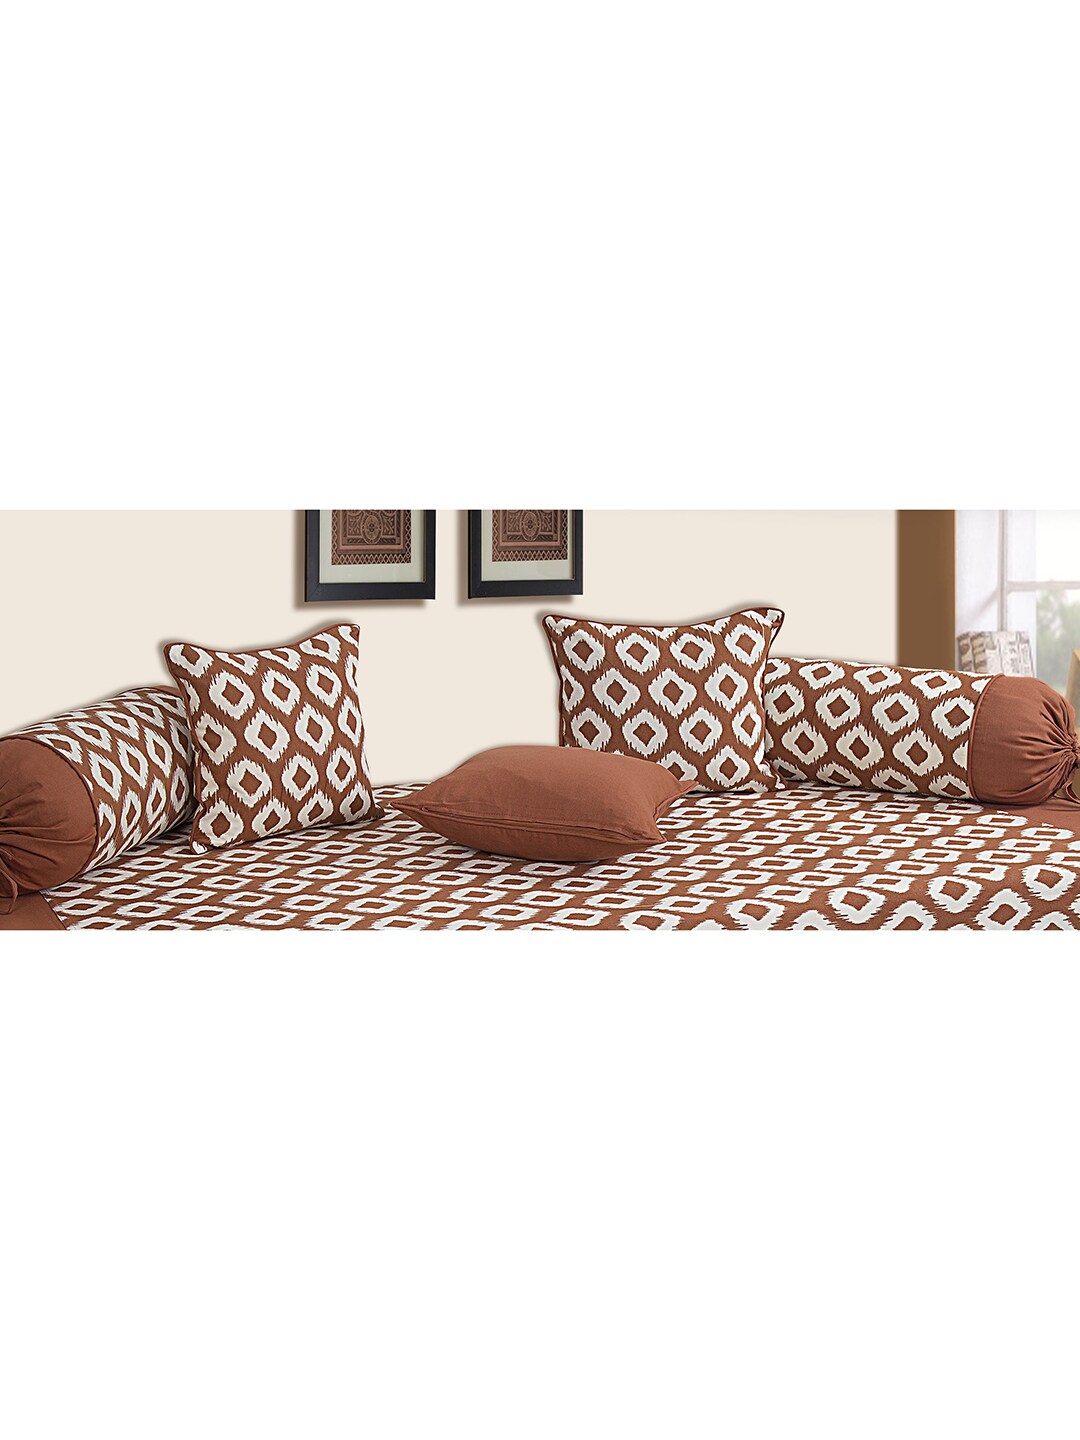 SHADES of LIFE Set Of 6 Mustard Self Design Woven Diwan Set With Bolsters & Cushions Price in India